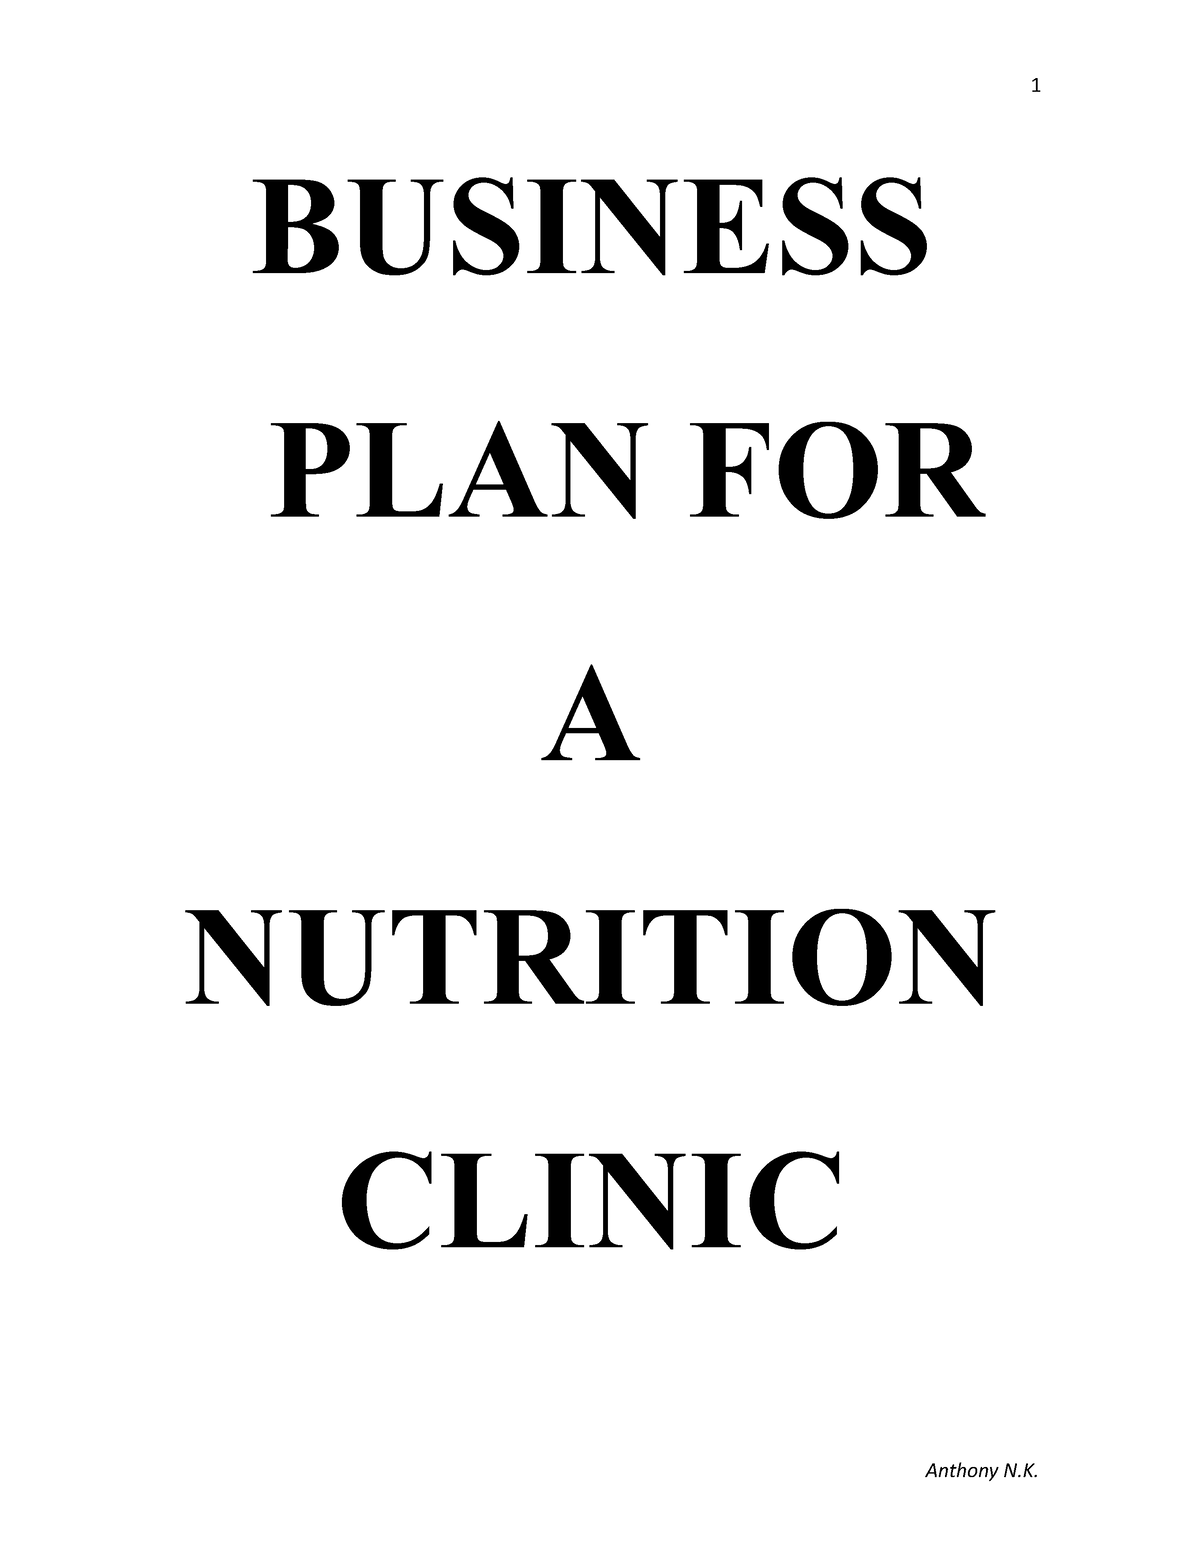 sample business plan for nutrition